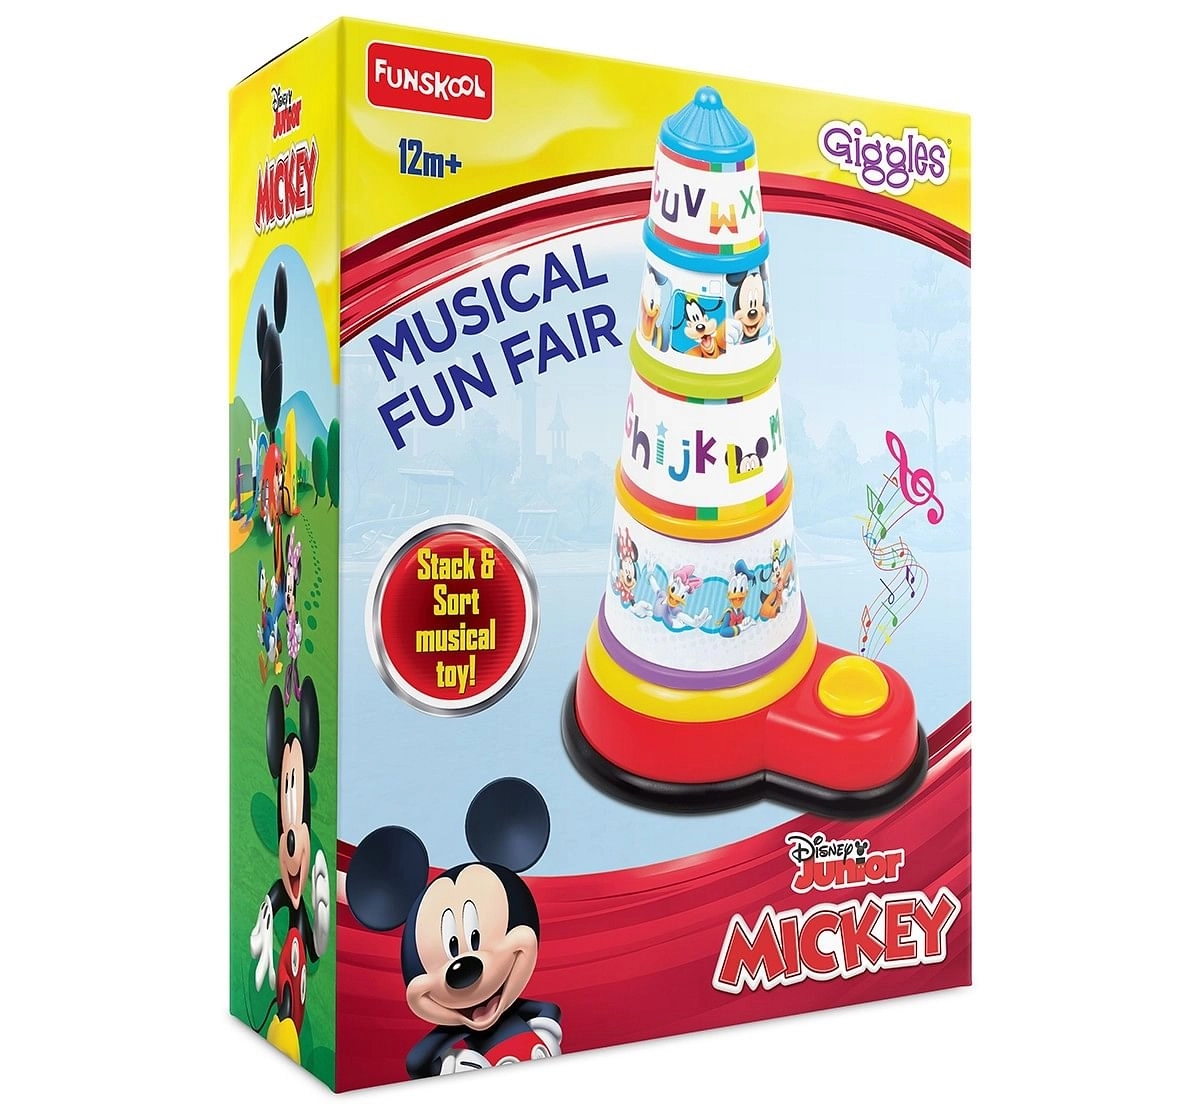 Giggles Musical Funfair  Early Learner Toys for Kids age 3Y+ 